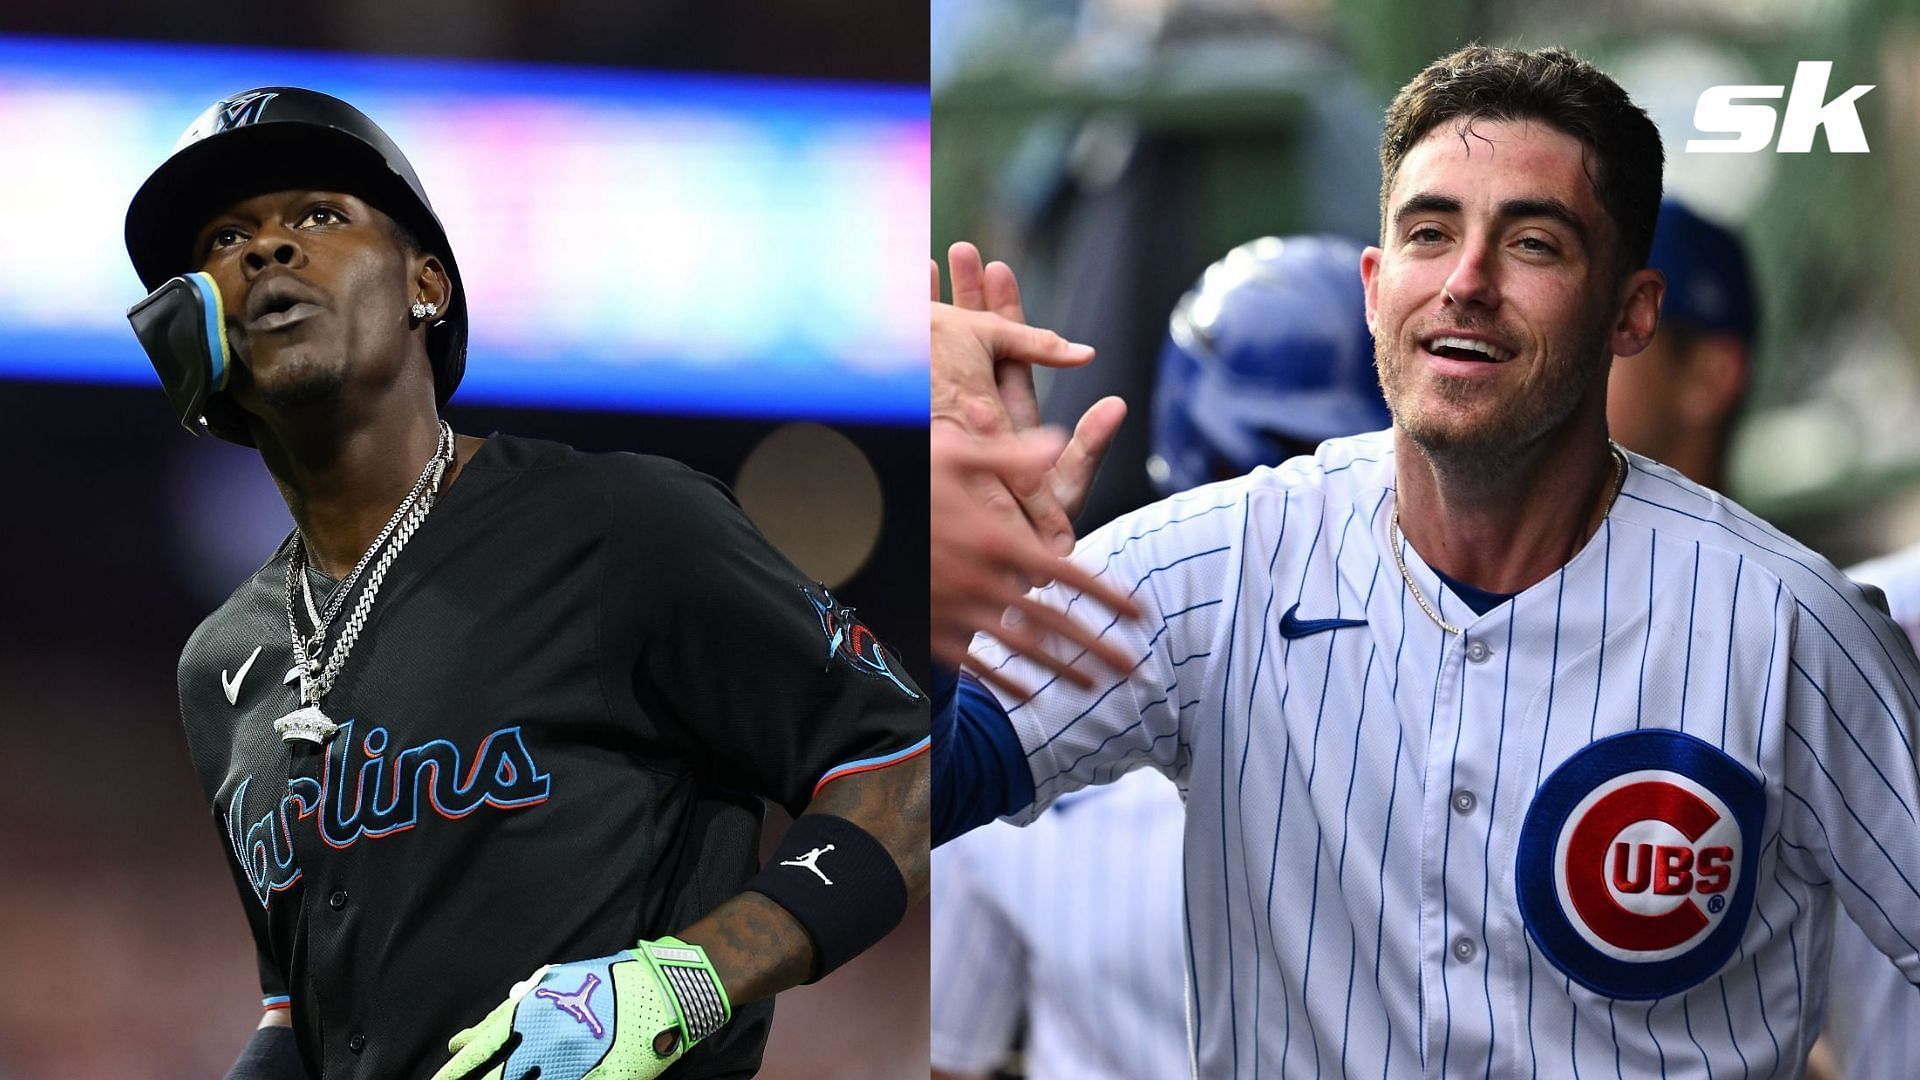 Jazz Chisholm Jr. and Cody Bellinger may be two outfielders to avoid in 2024 MLB fantasy drafts